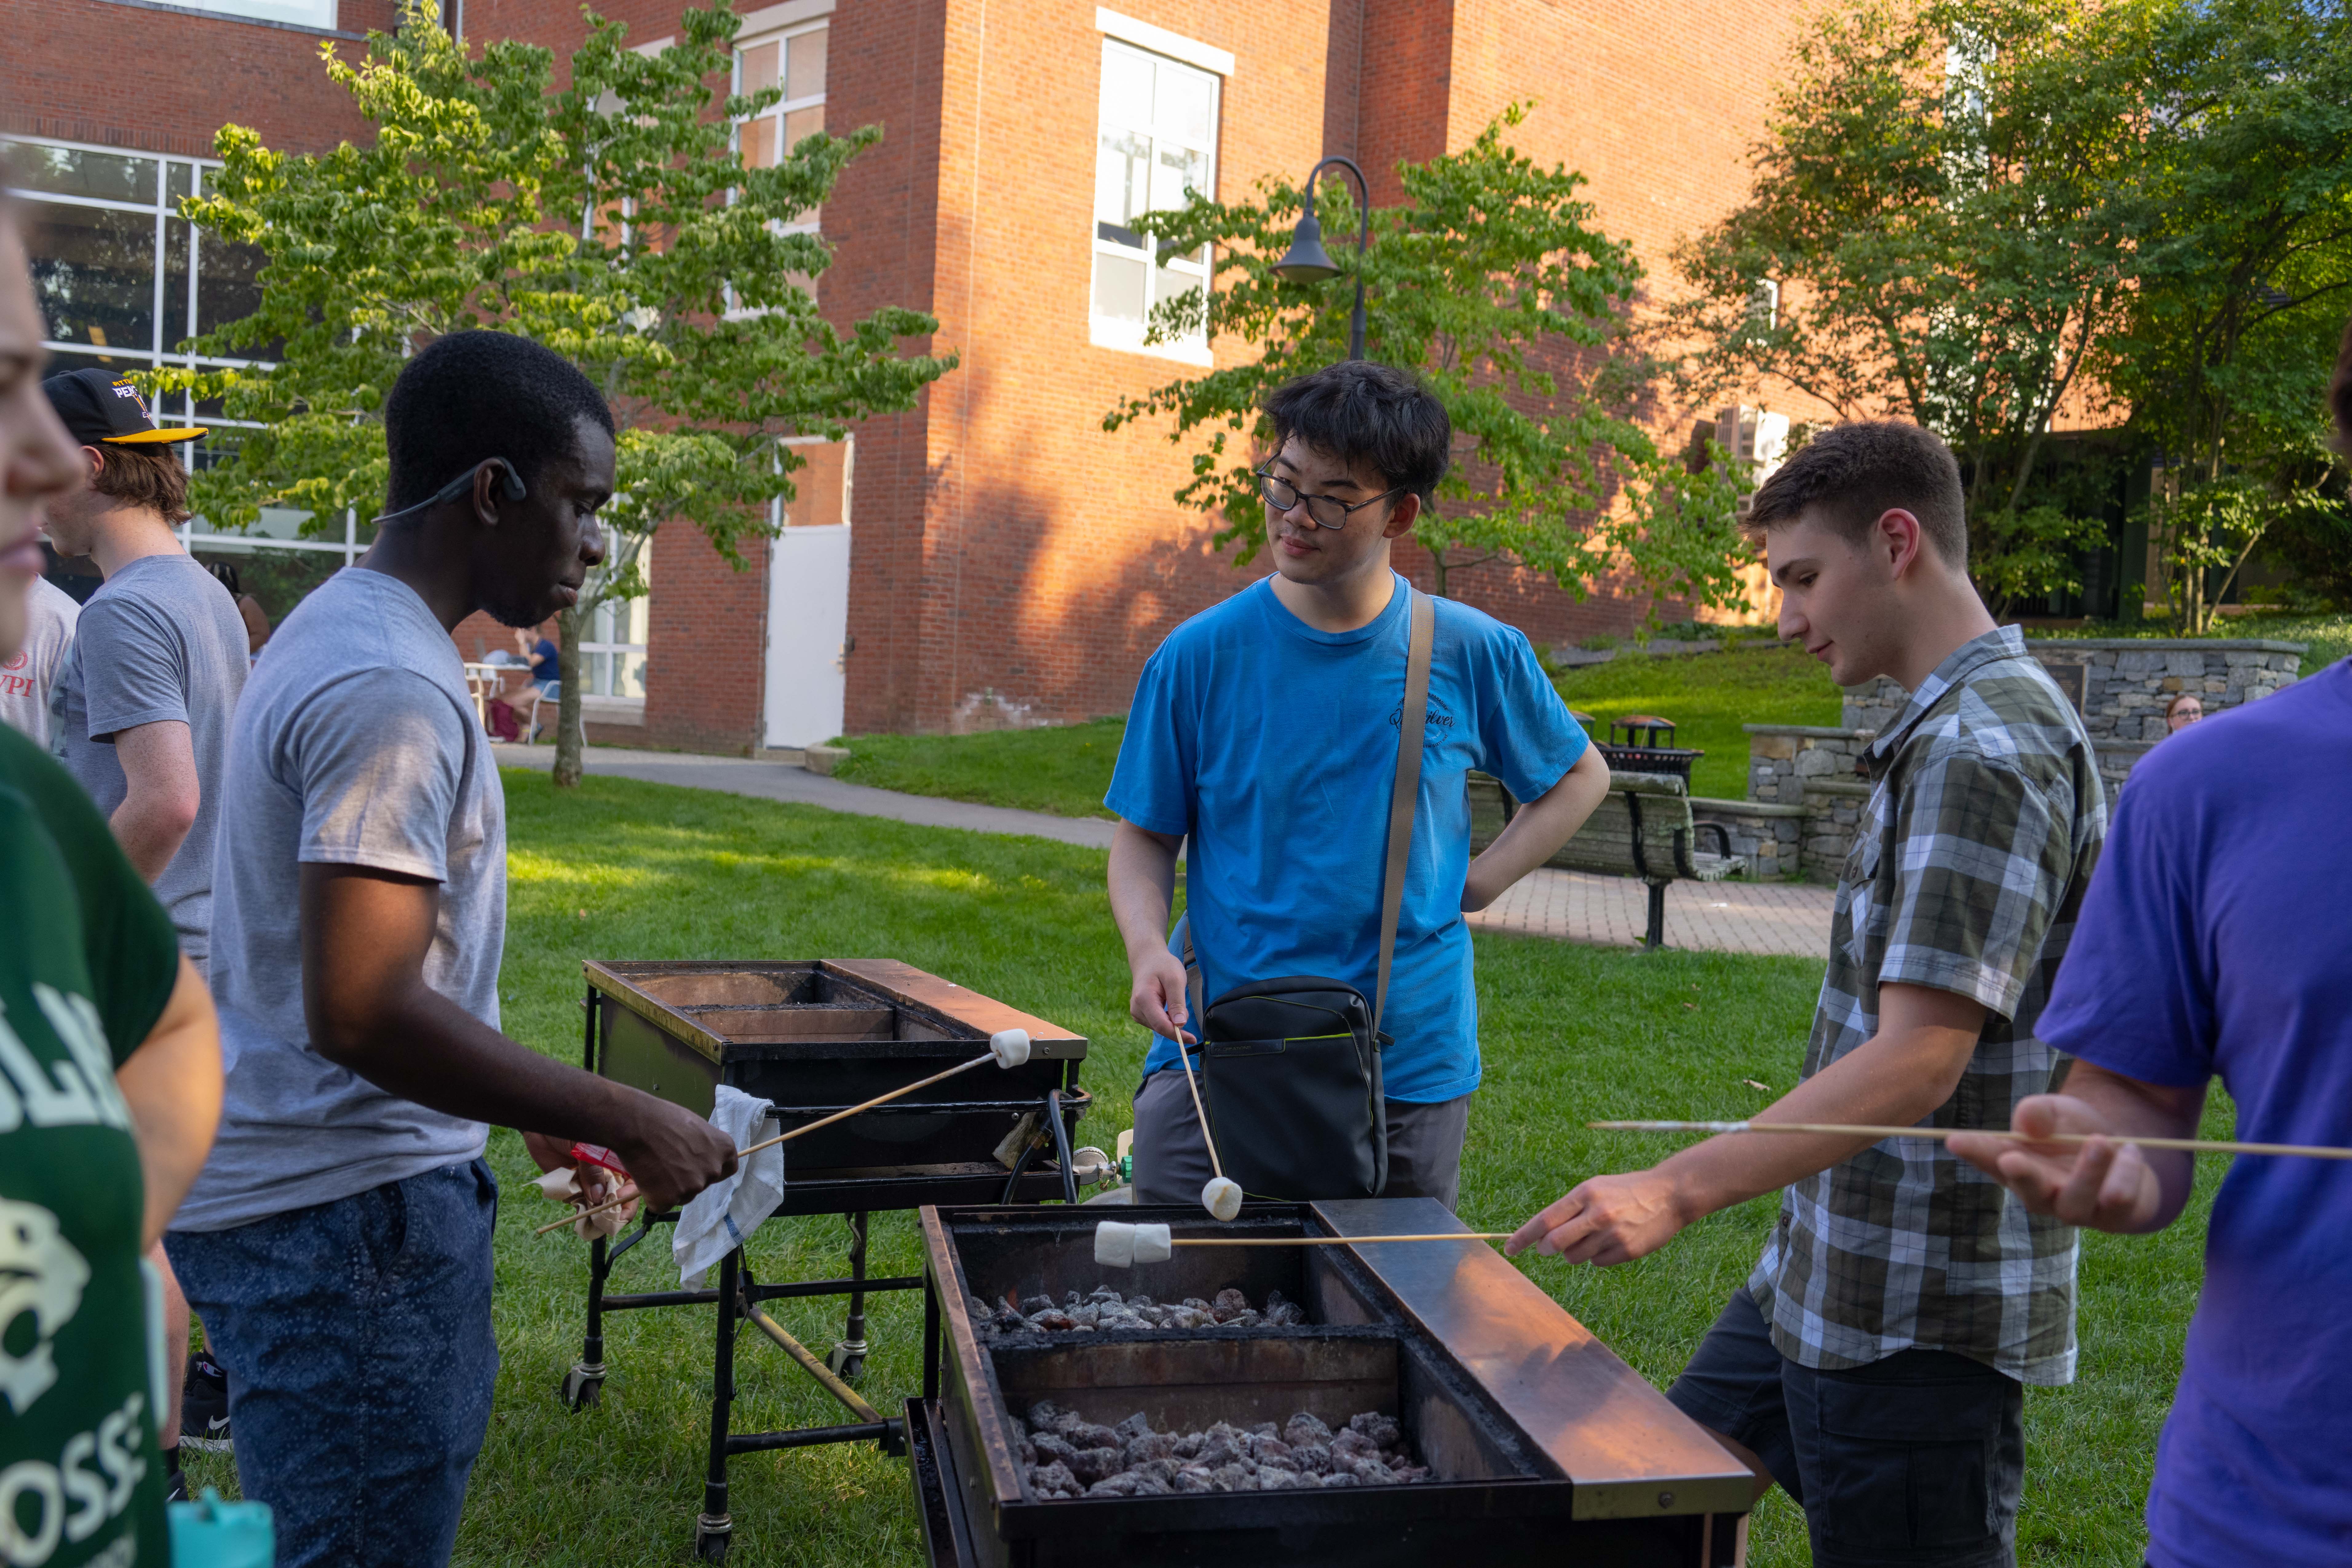 students roasting marshmallows over a grill